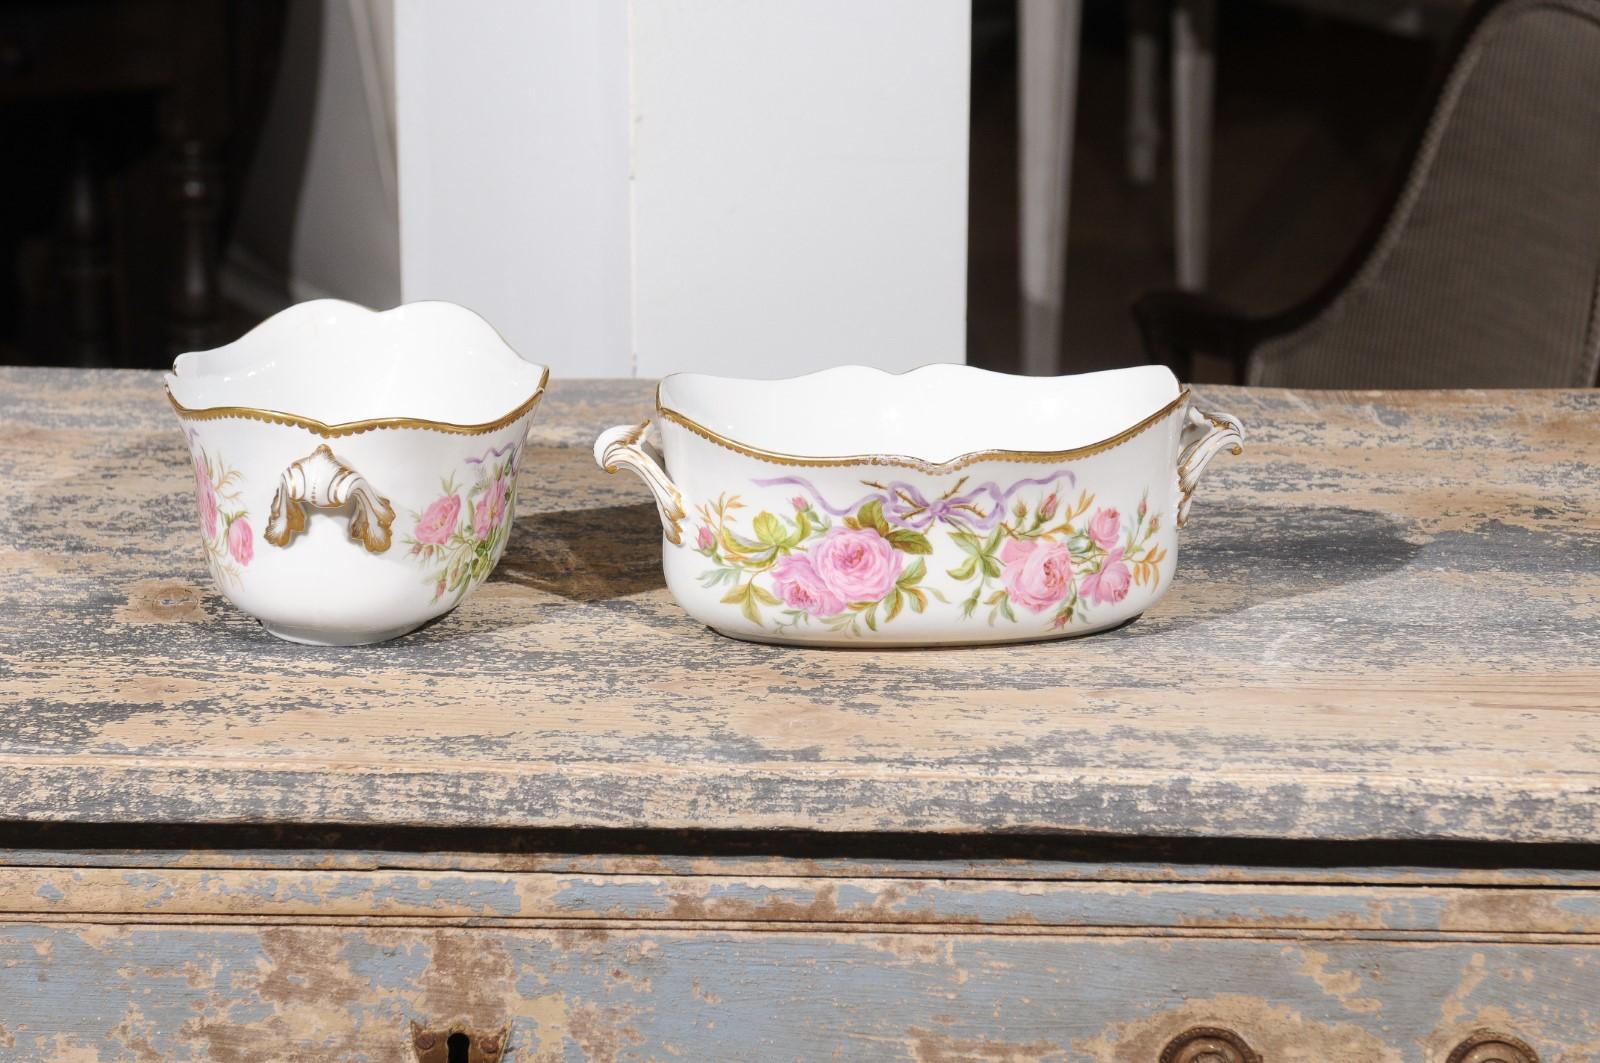 English Porcelain Bowls Depicting Bouquets of Pink Roses with Gilt Accents For Sale 4